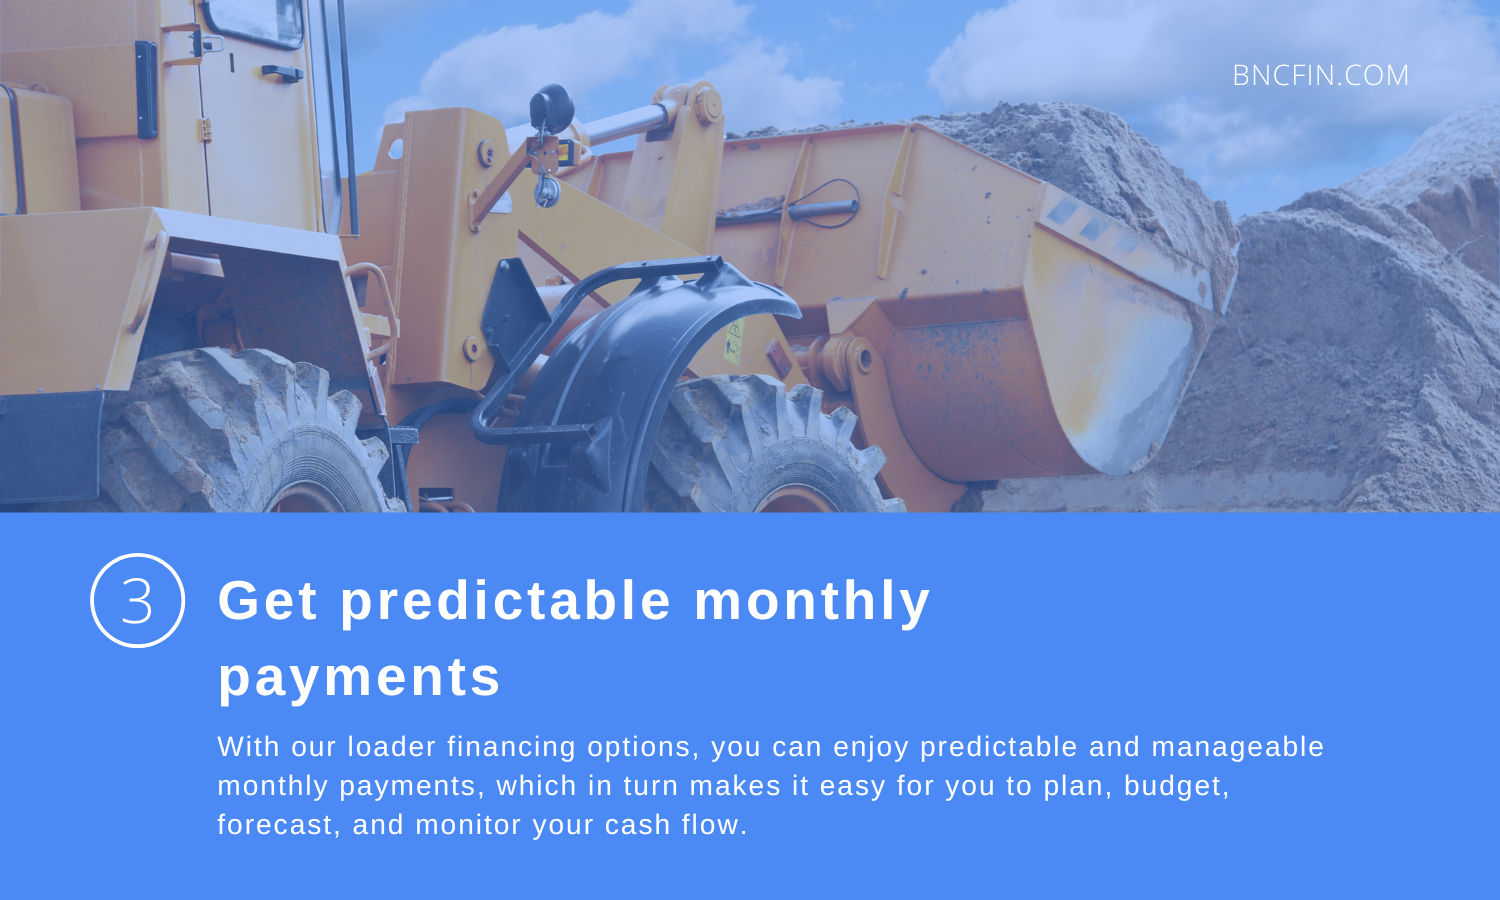 Get predictable monthly payments.